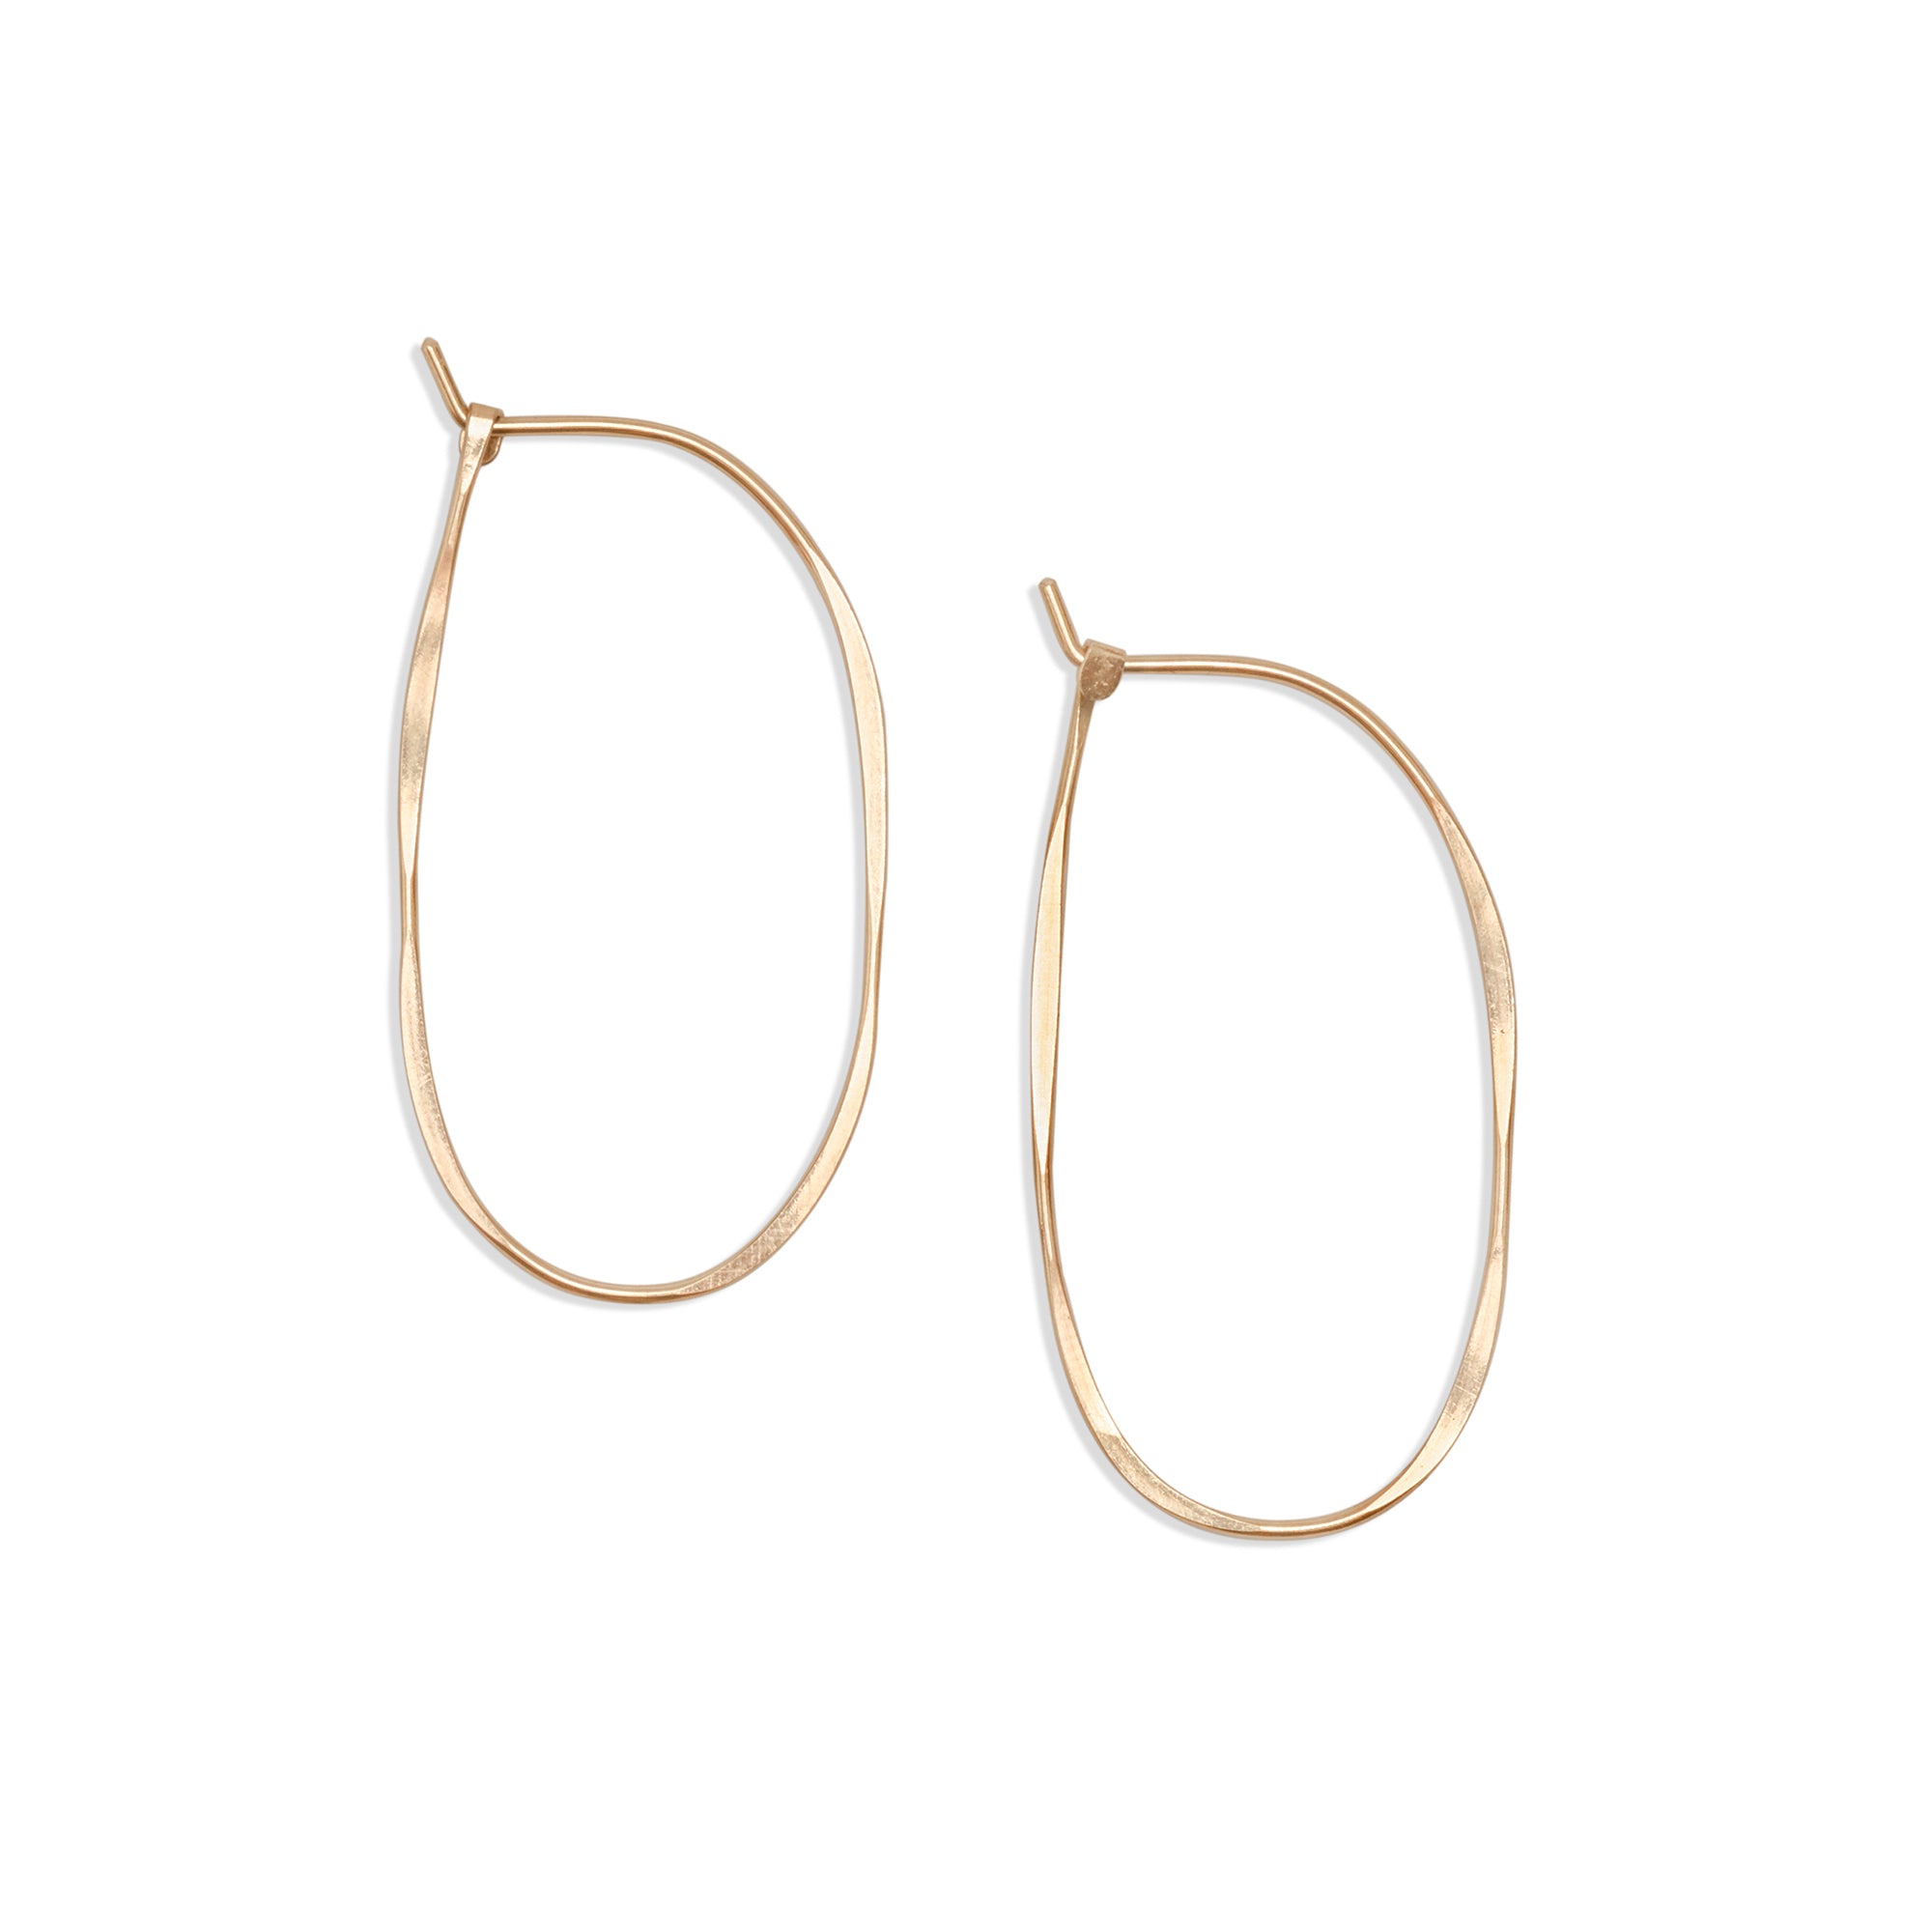 The thin Oval Hoops of hammered gold-fill or sterling silver form a continuous oval that is finished with a hook closure.